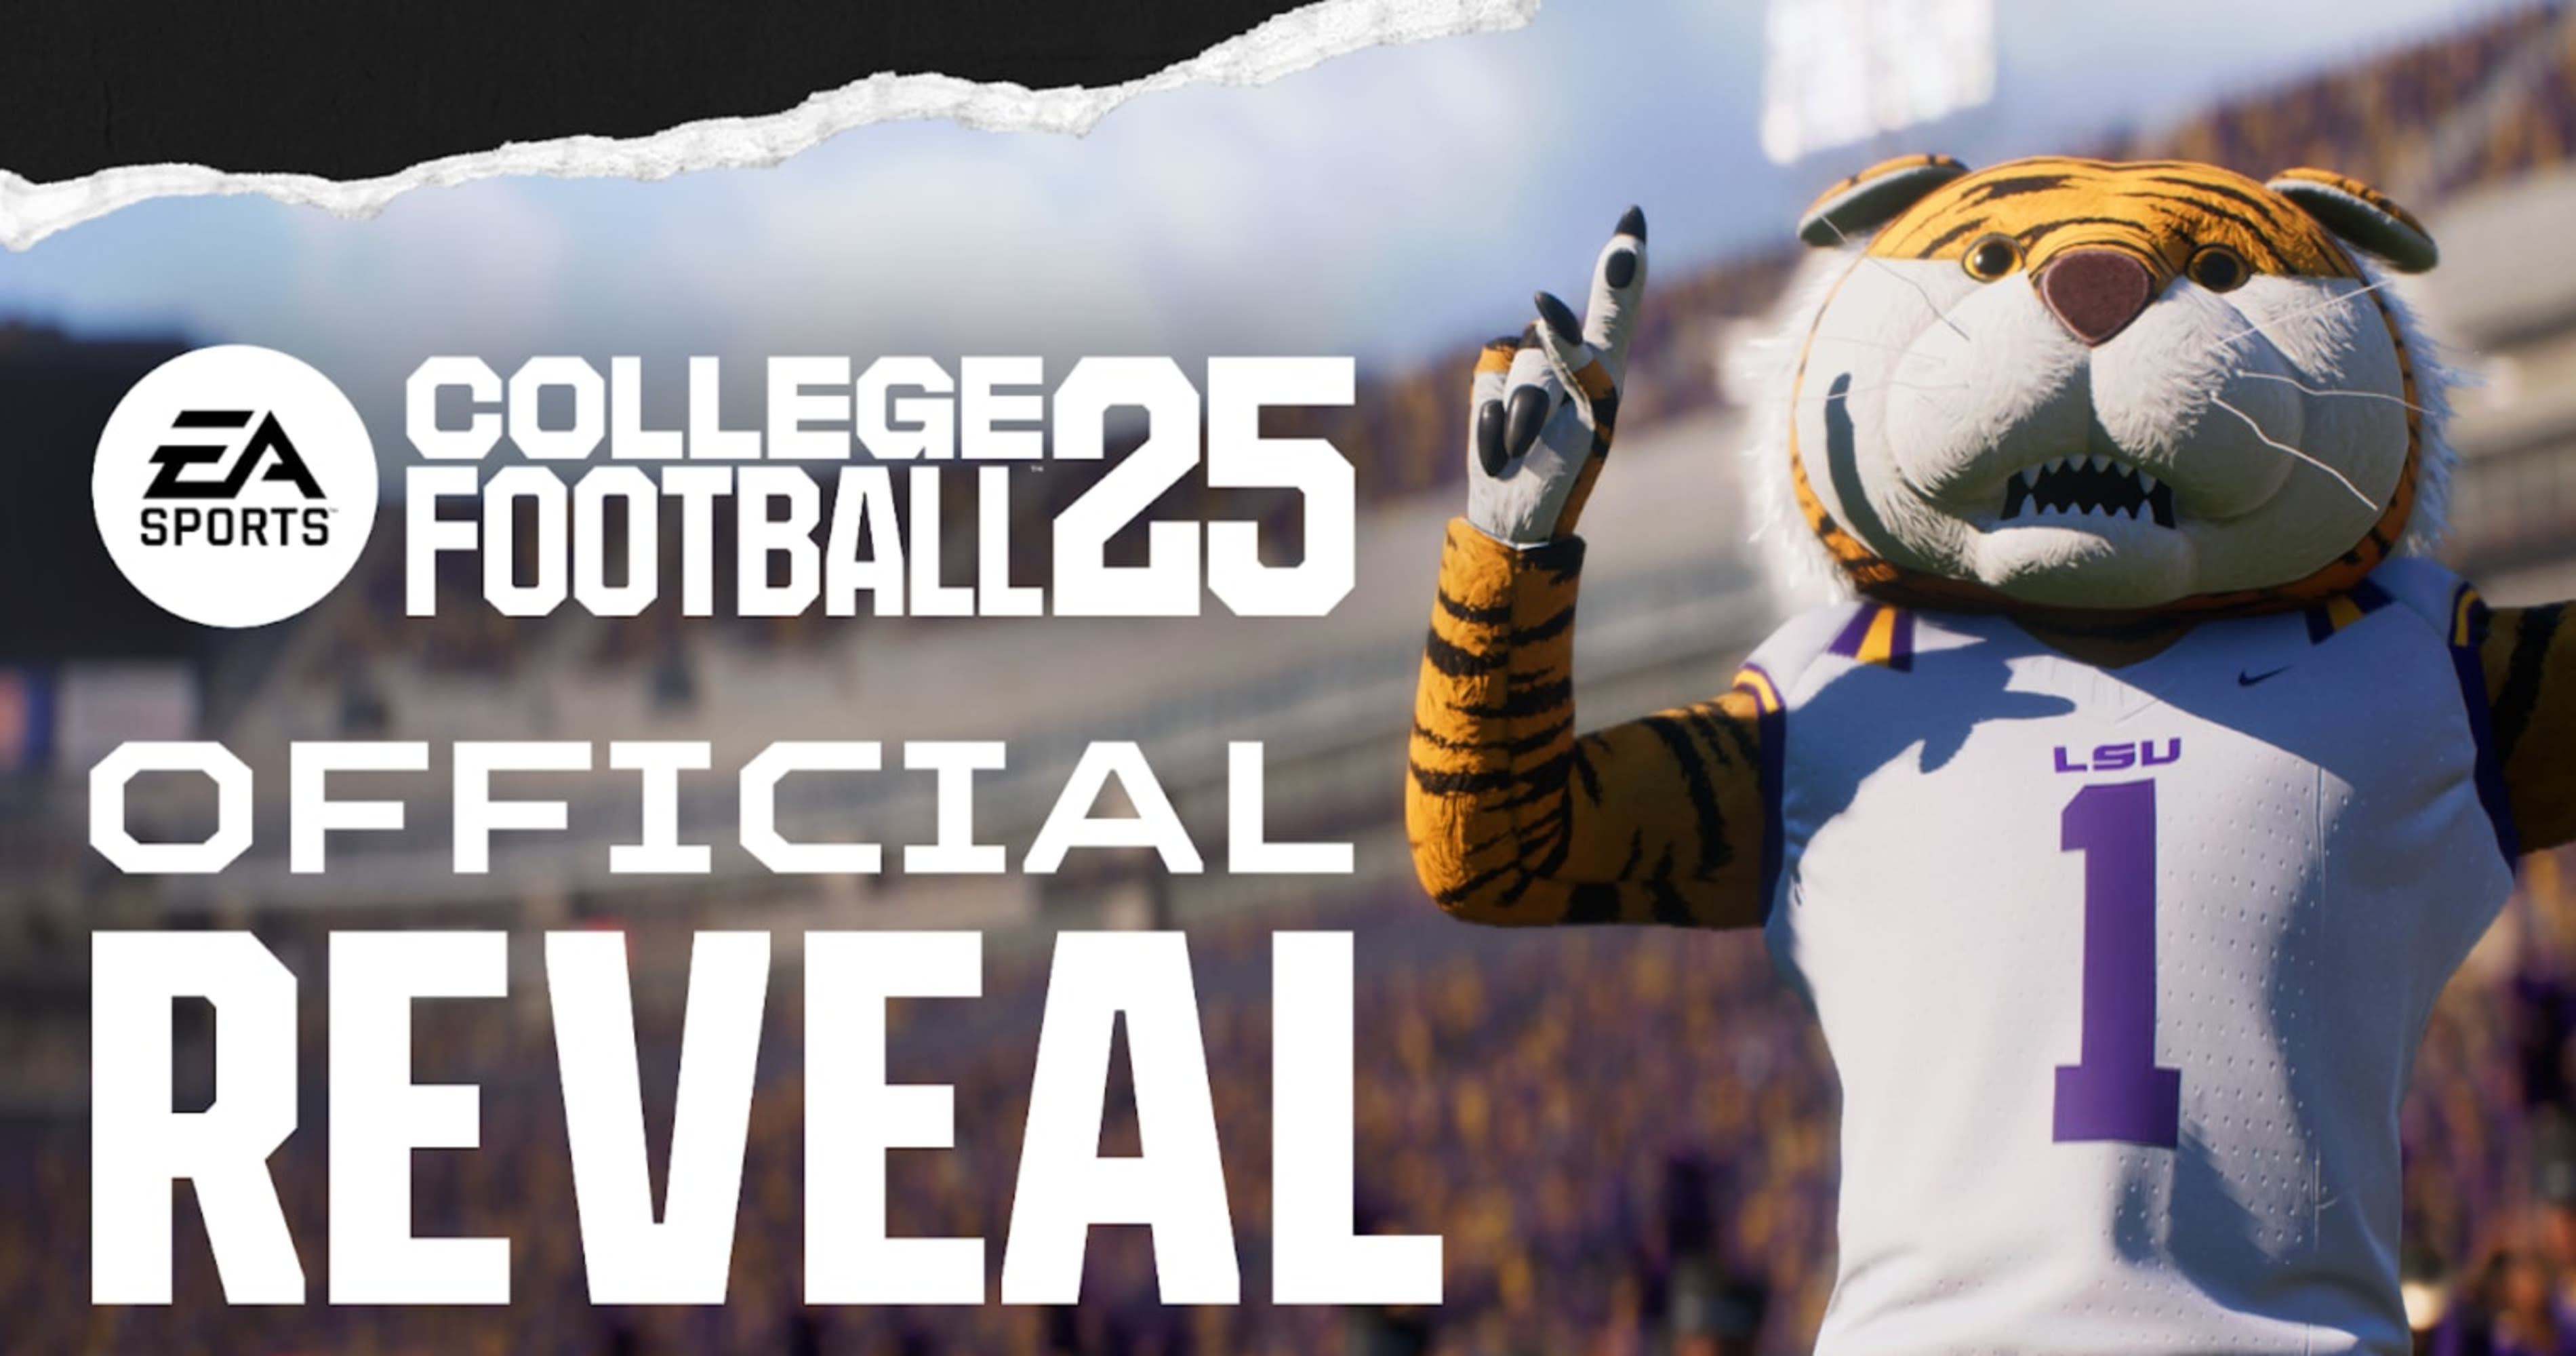 EA's College Football 25 Reveals Gameplay, Dynasty Mode and More Features in Trailer